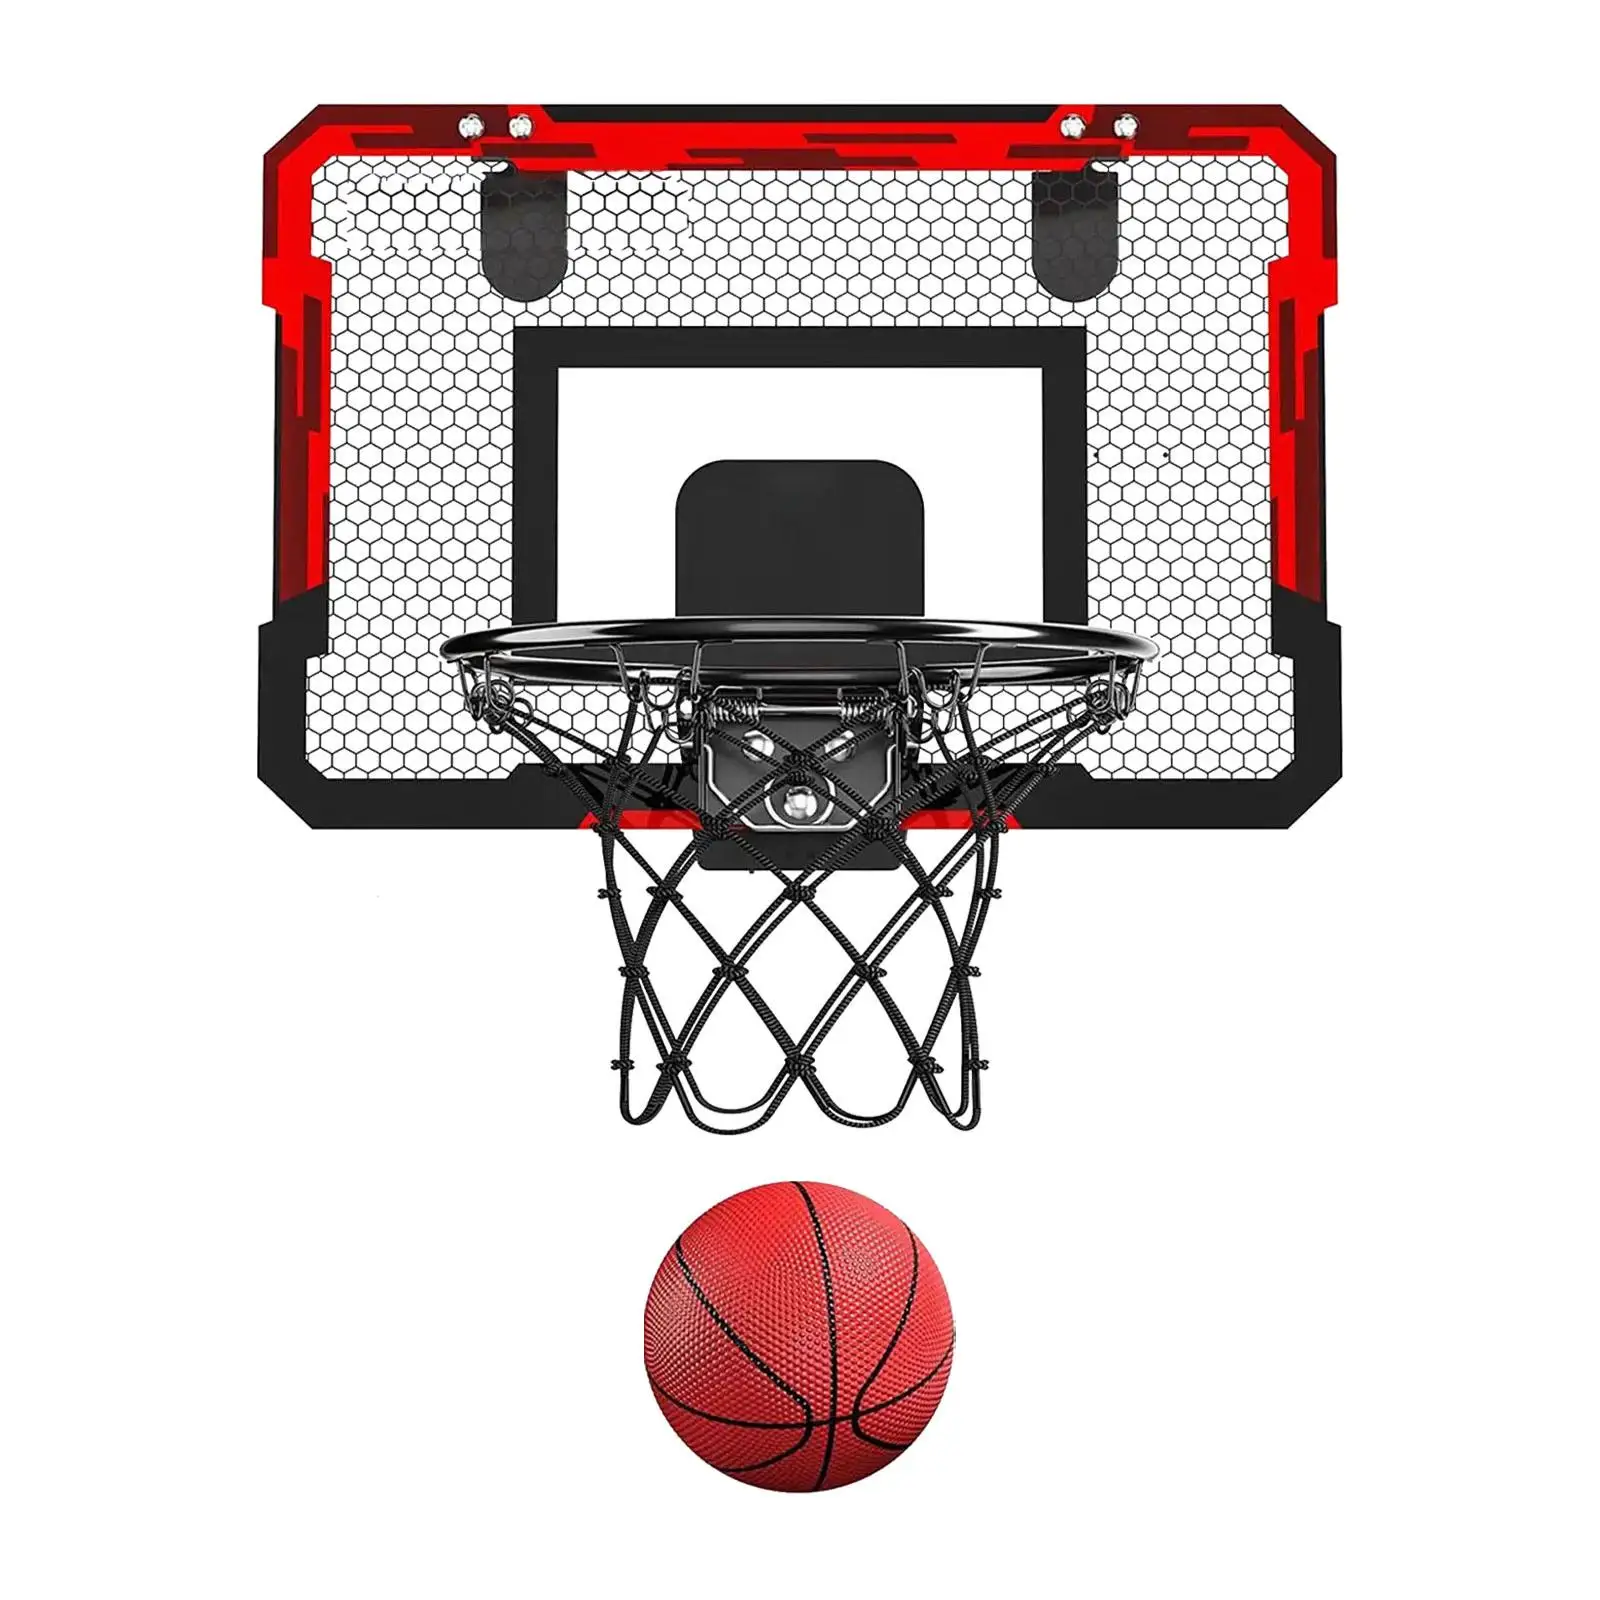 Basketball Hoop Sports Game with Pump Accessories with Balls Mini Hoop Set Door Basketball Hoops for Outdoor Indoor Boys Kids